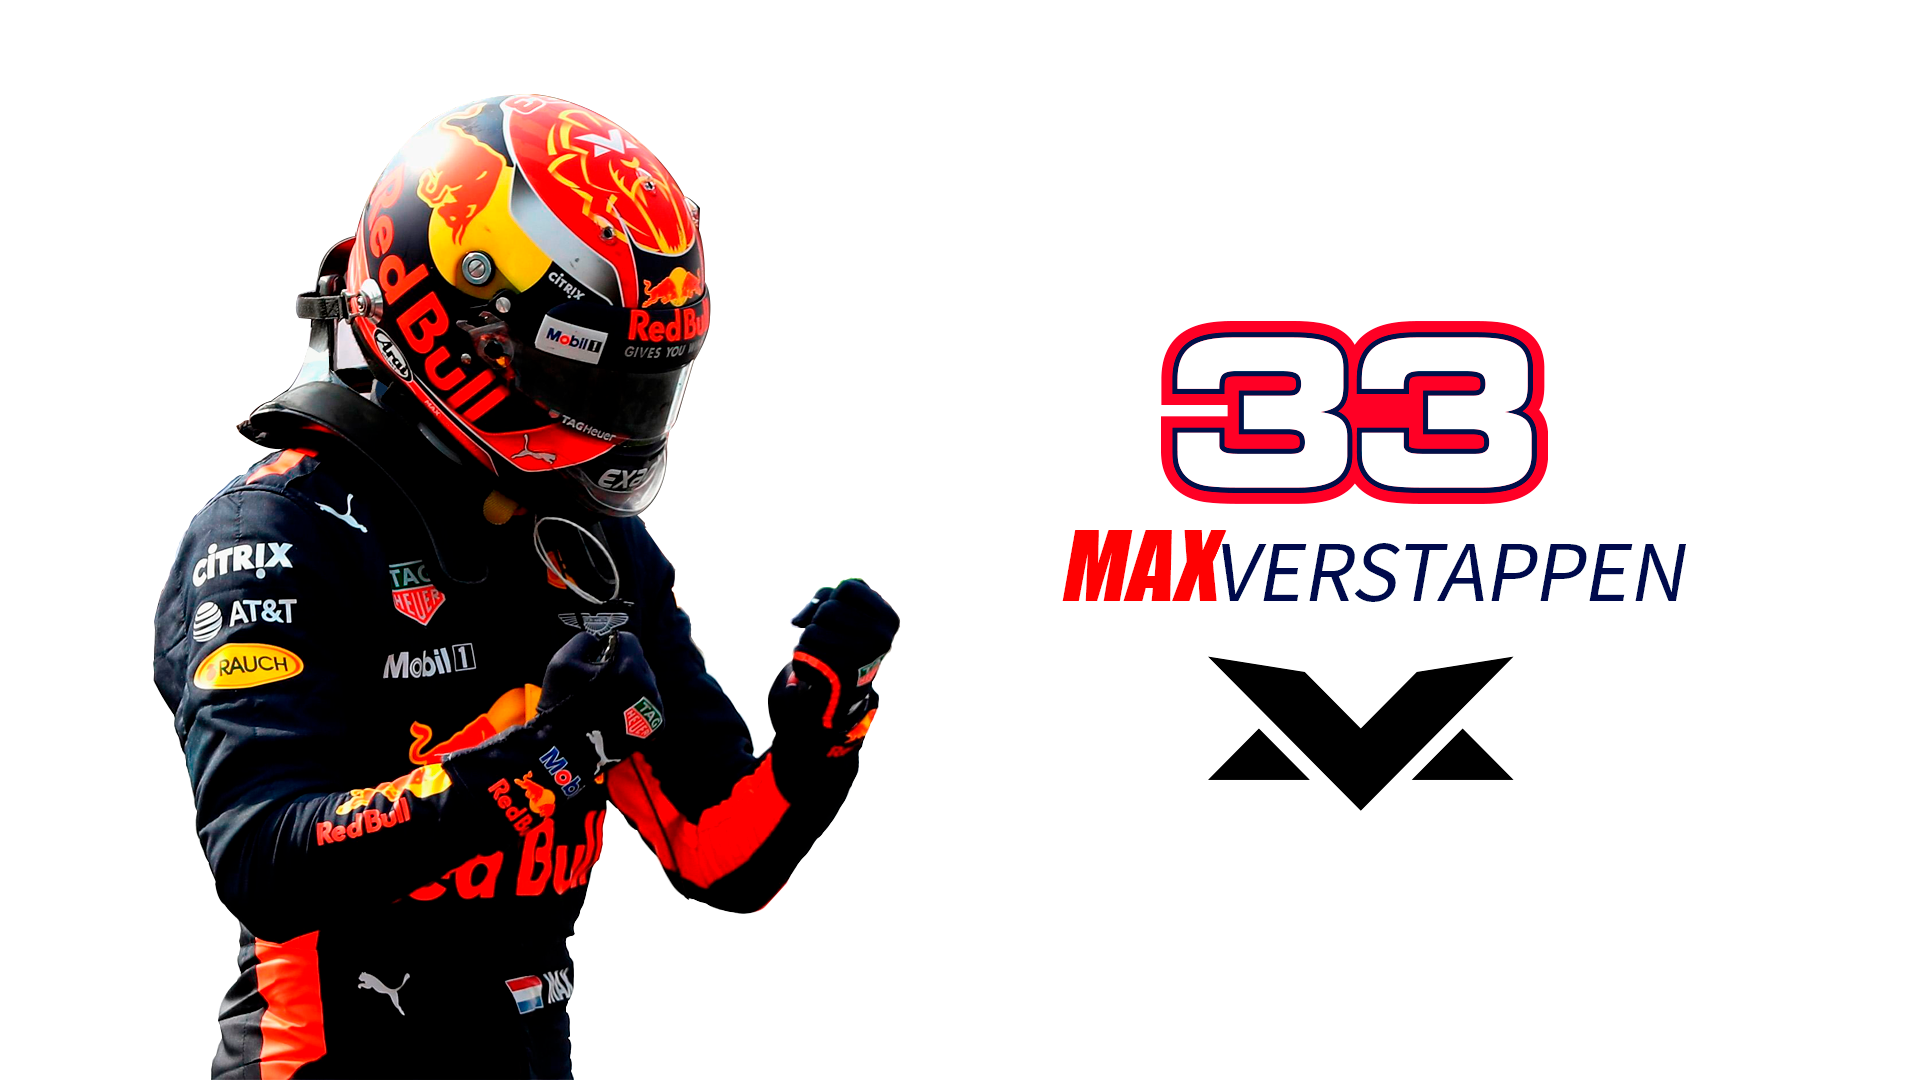 Wanted to share this Max Verstappen wallpaper I made this season!